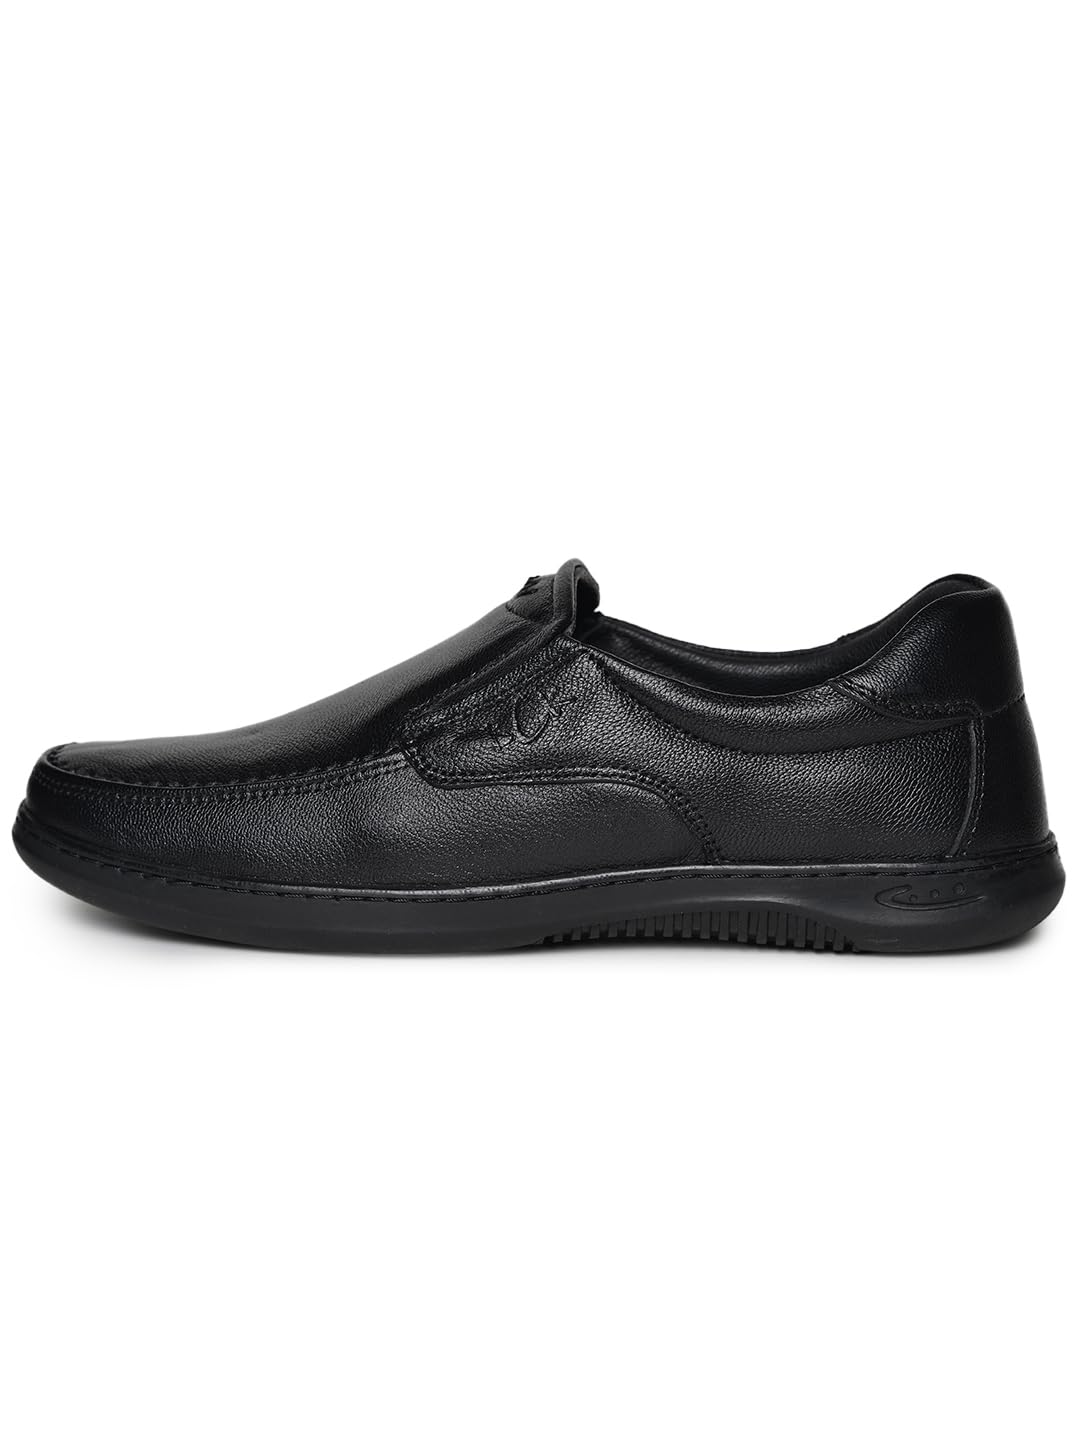 Errol Genuine Leather Casual Shoes for Mens (Black, 40) 